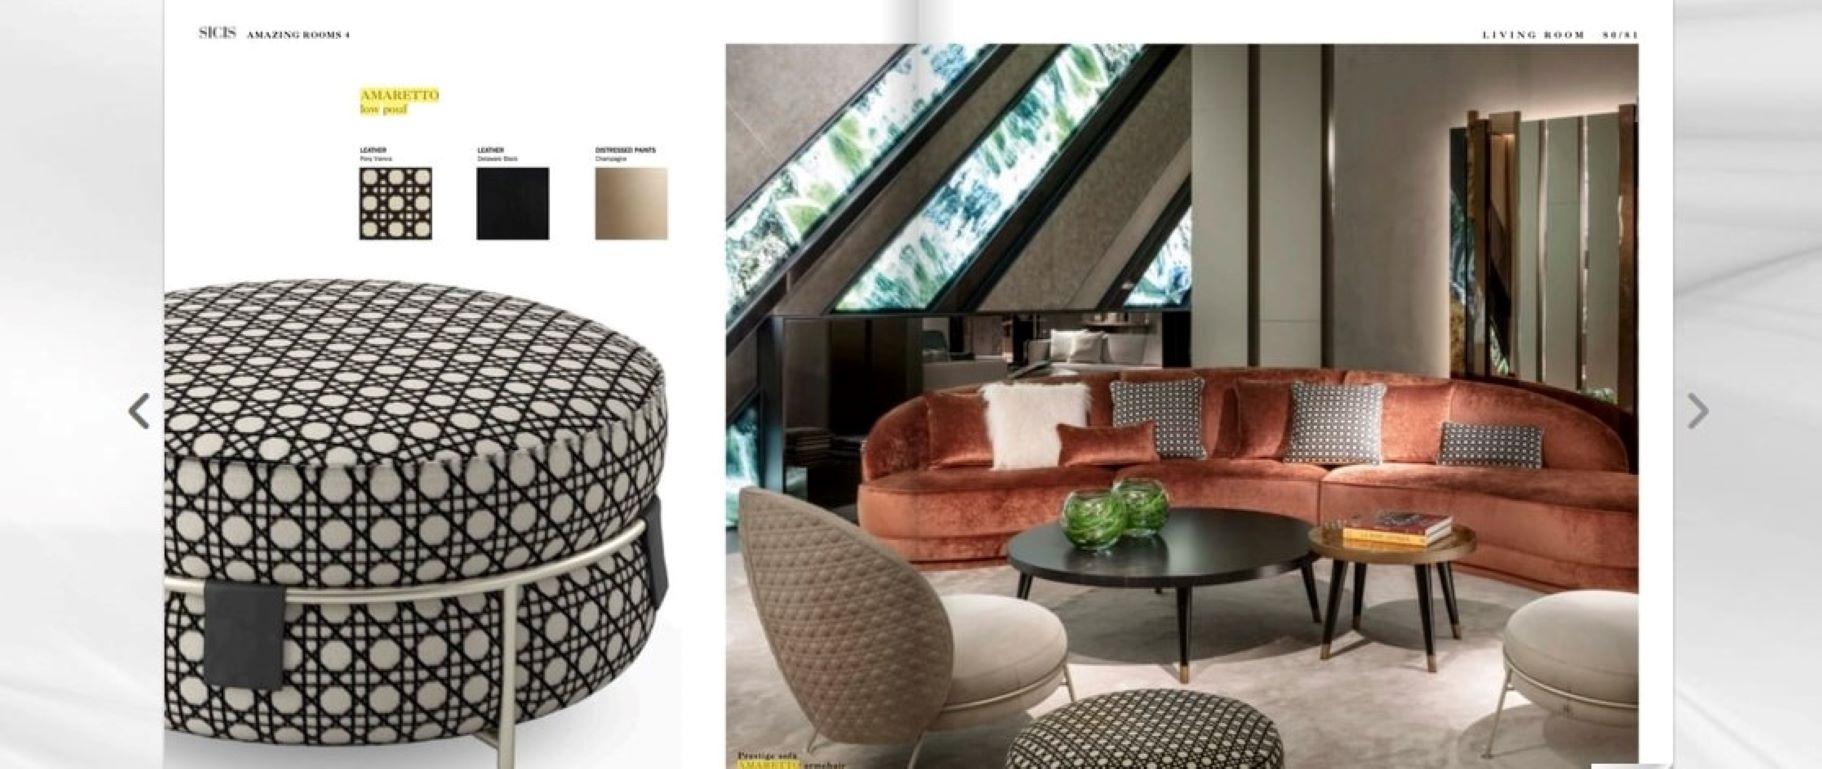 Other Fantastic Low Pouf Amaretto Collection Available in Different Colors For Sale